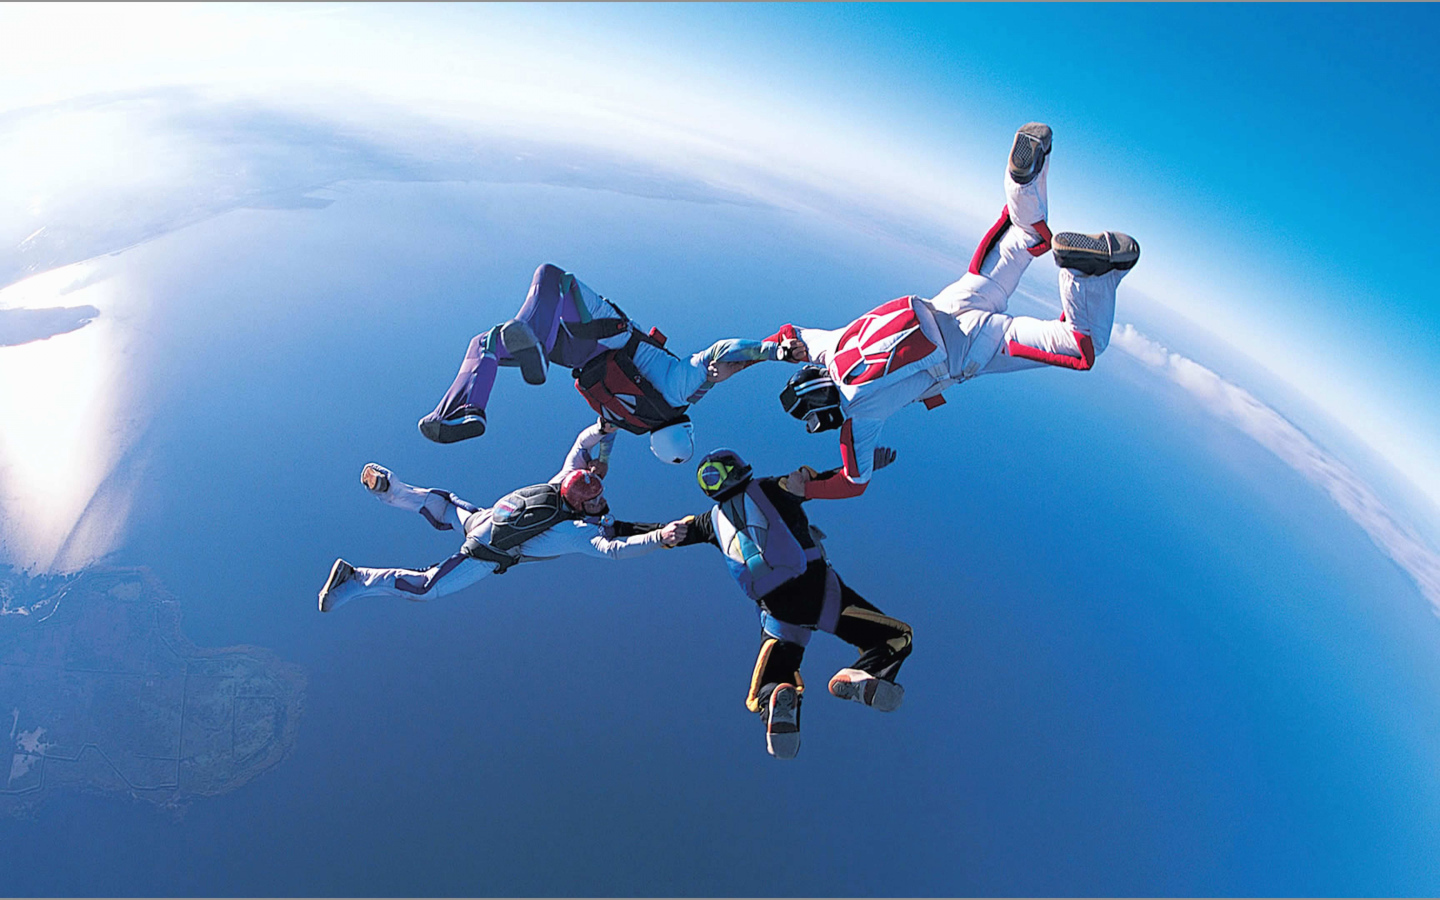 Four skydivers in the air